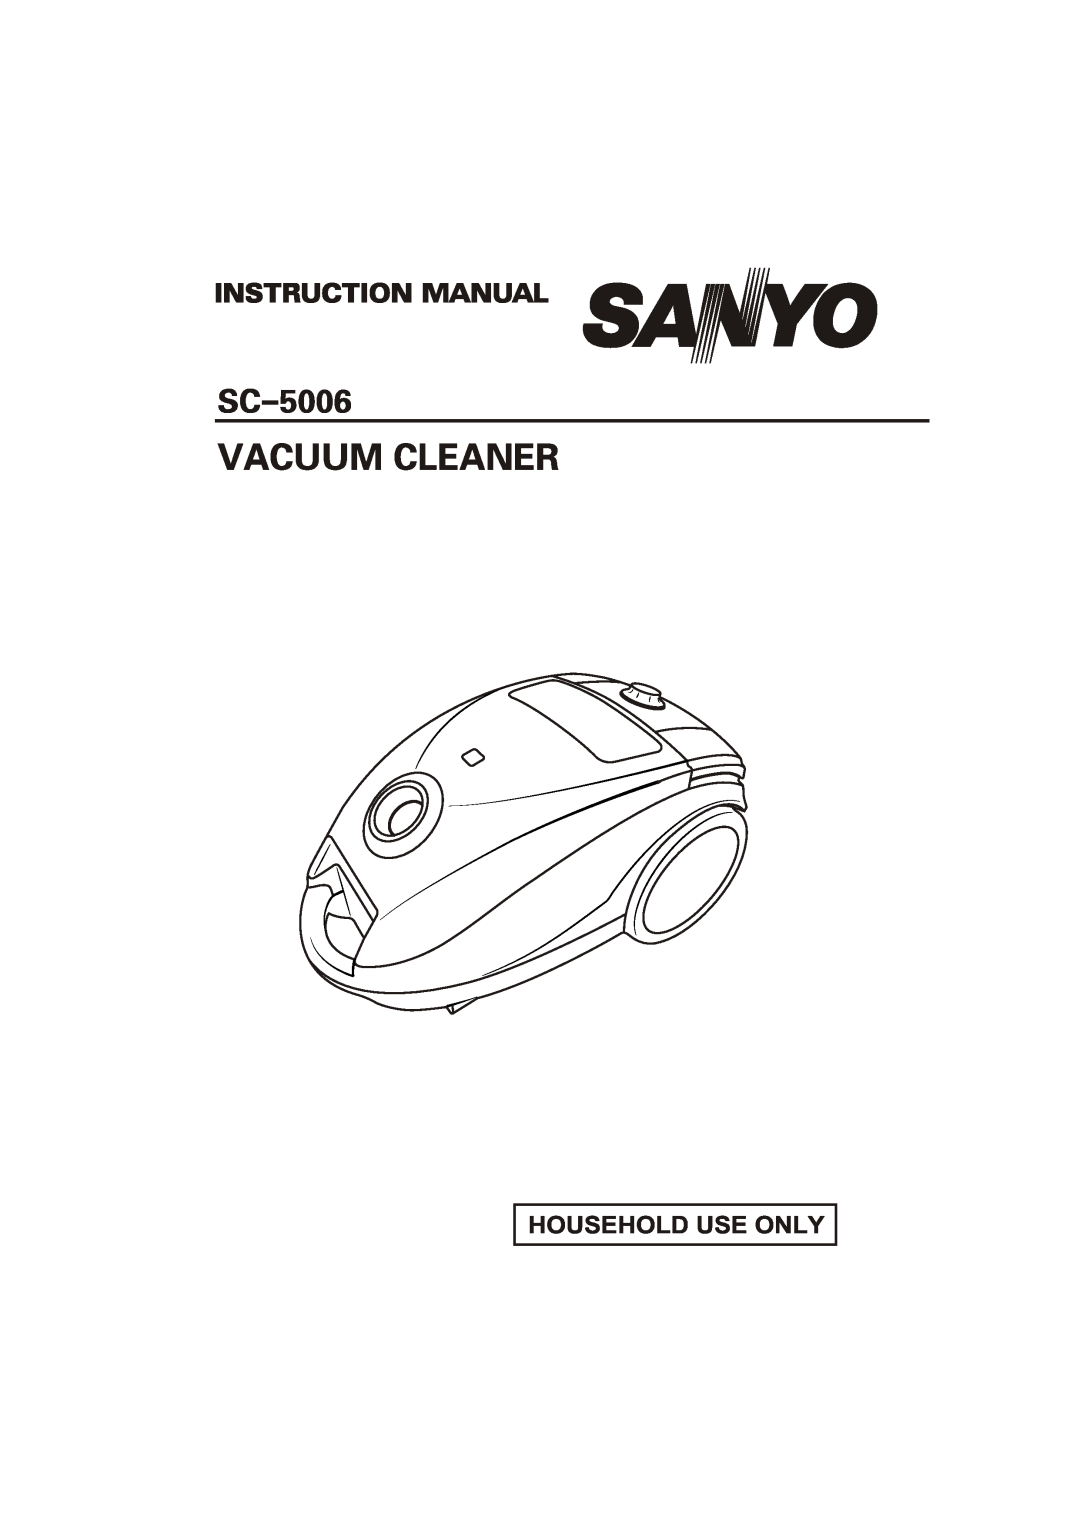 Sanyo SC-5006 instruction manual Household Use Only 